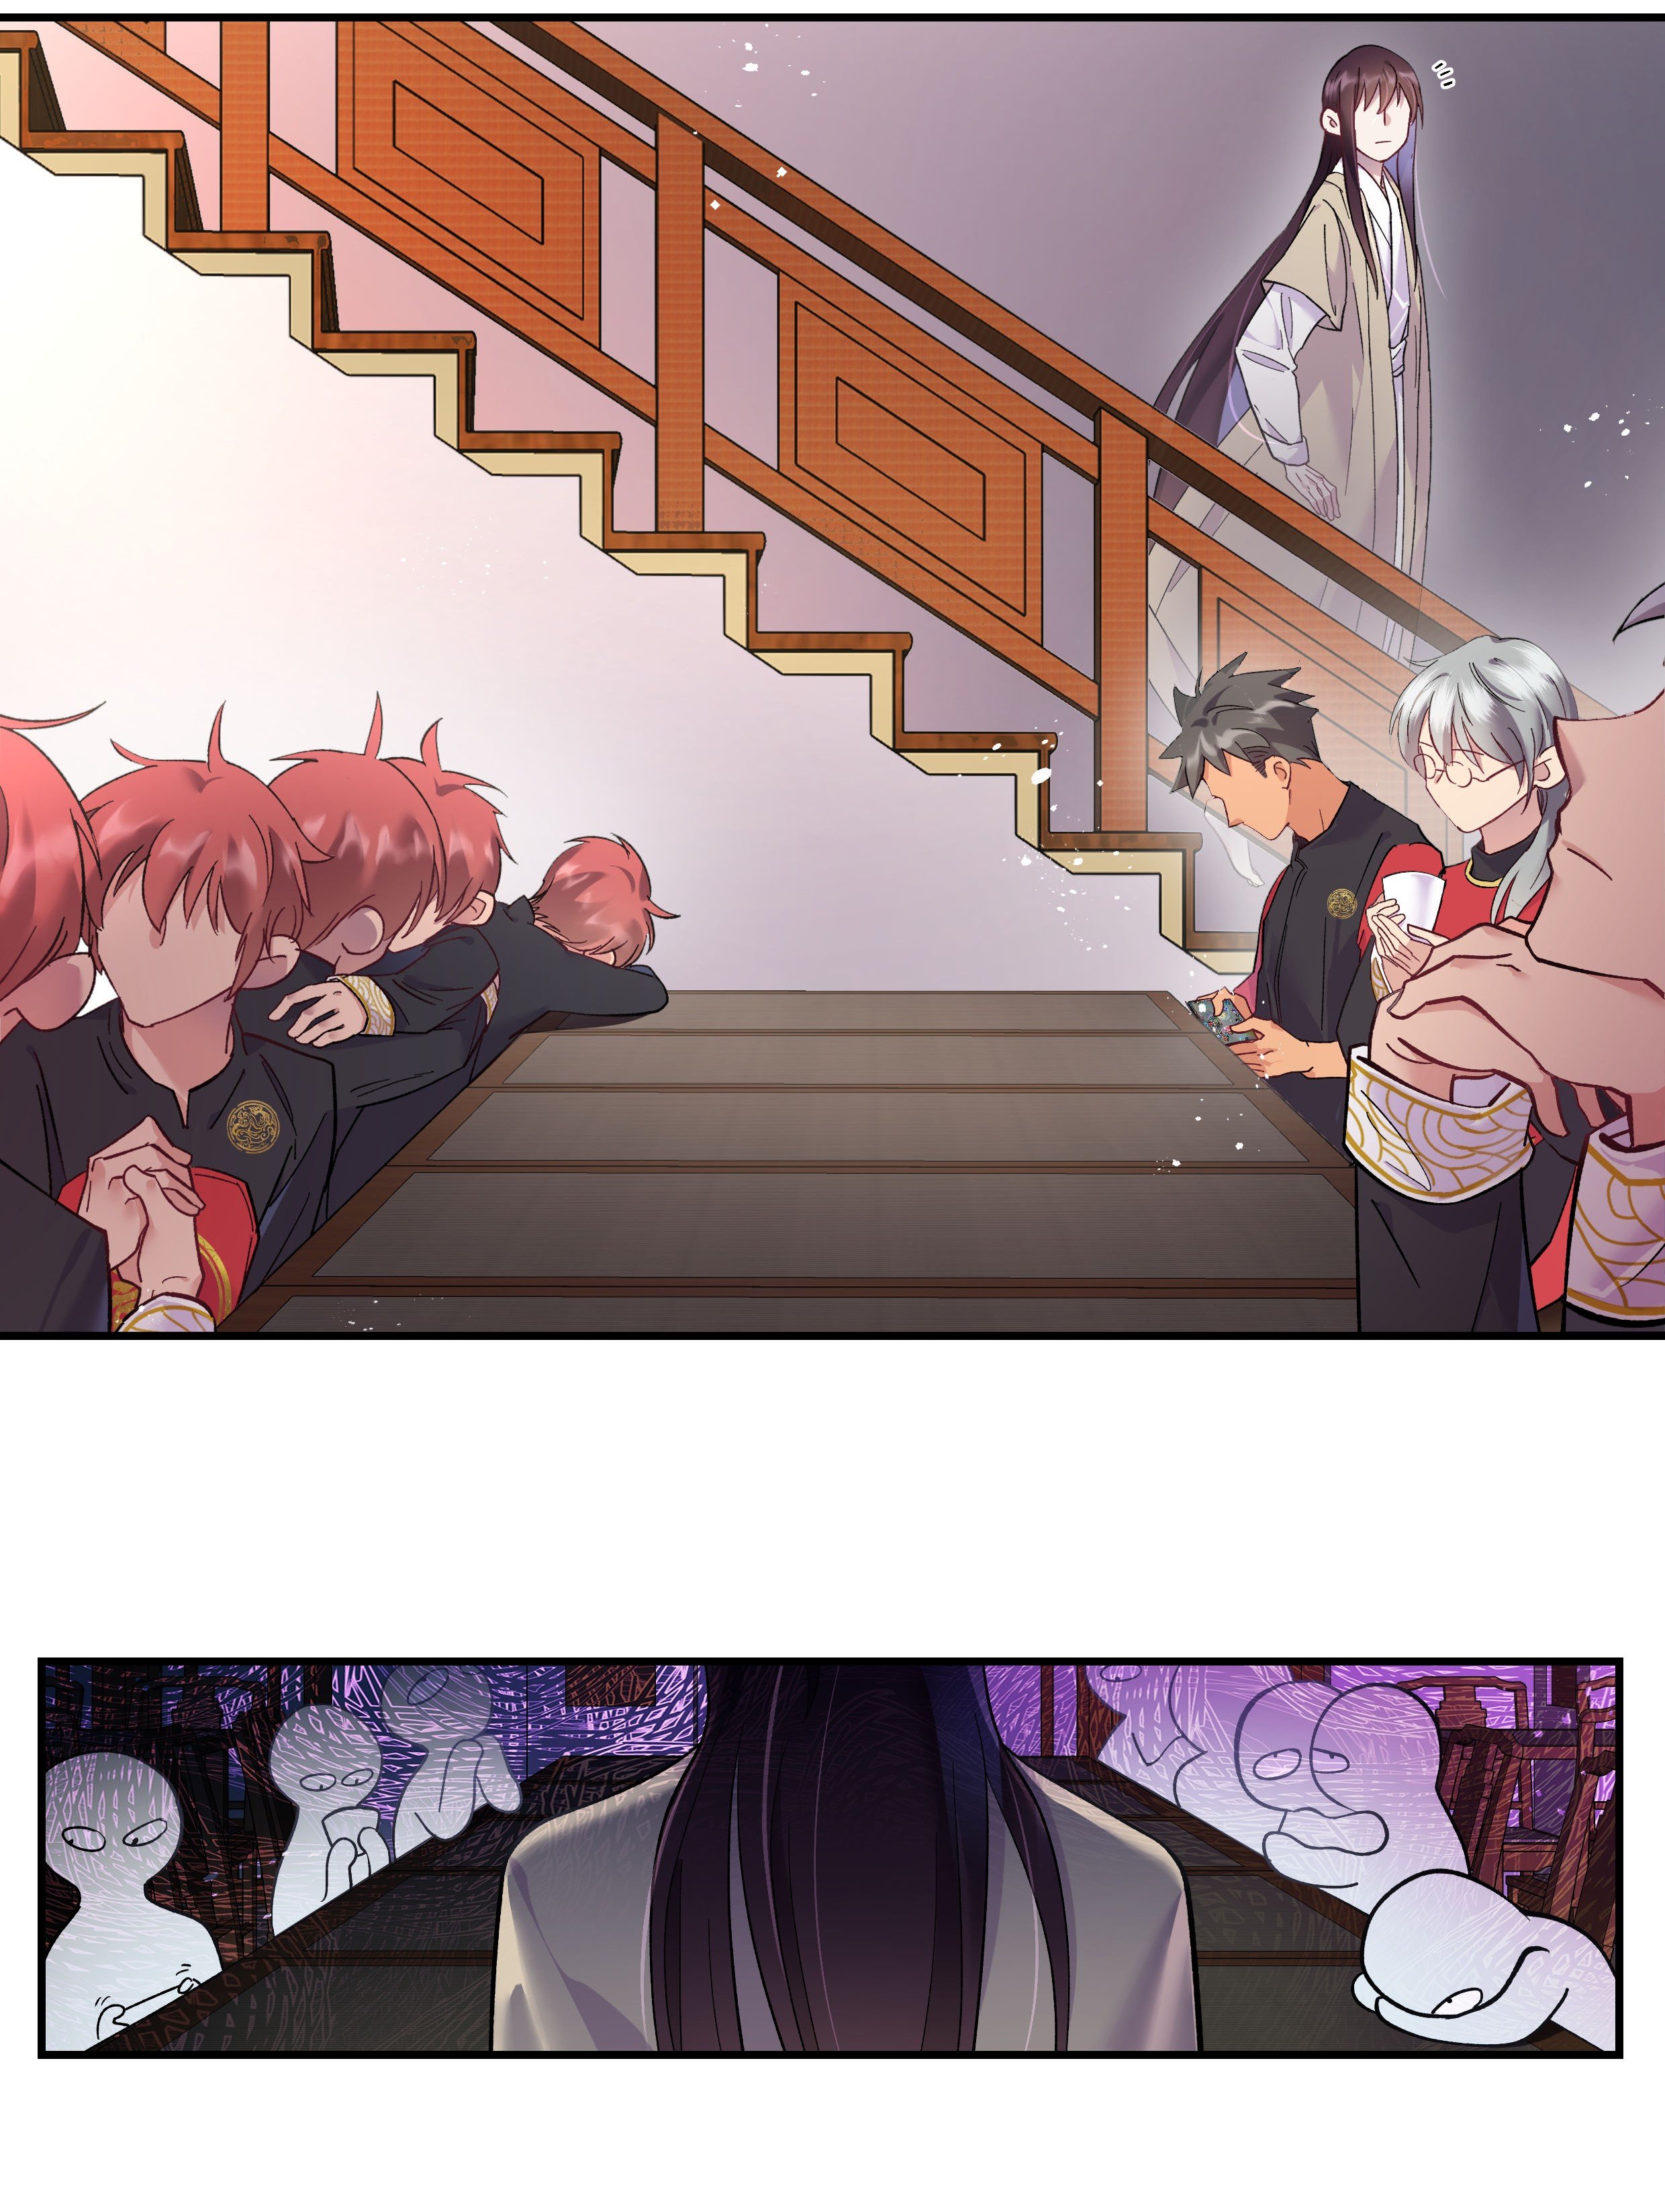 Pixiu’s Eatery, No Way Out Chapter 3 - Page 8